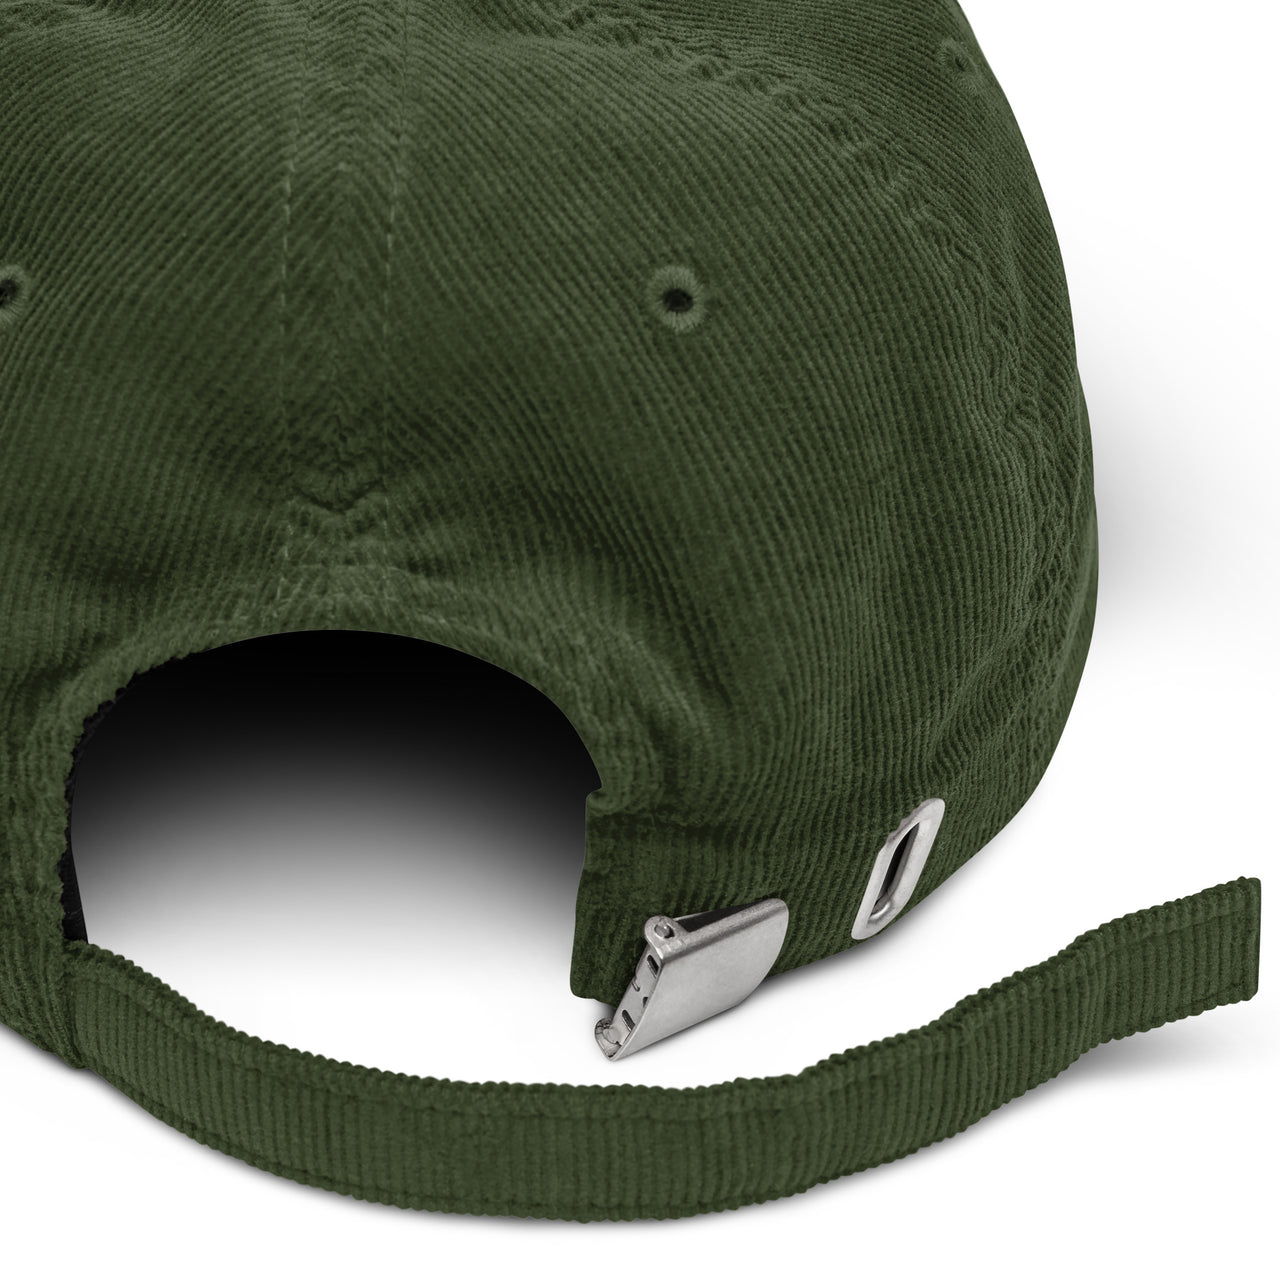 LA Muscle Limited Corduroy hat in Olive Green